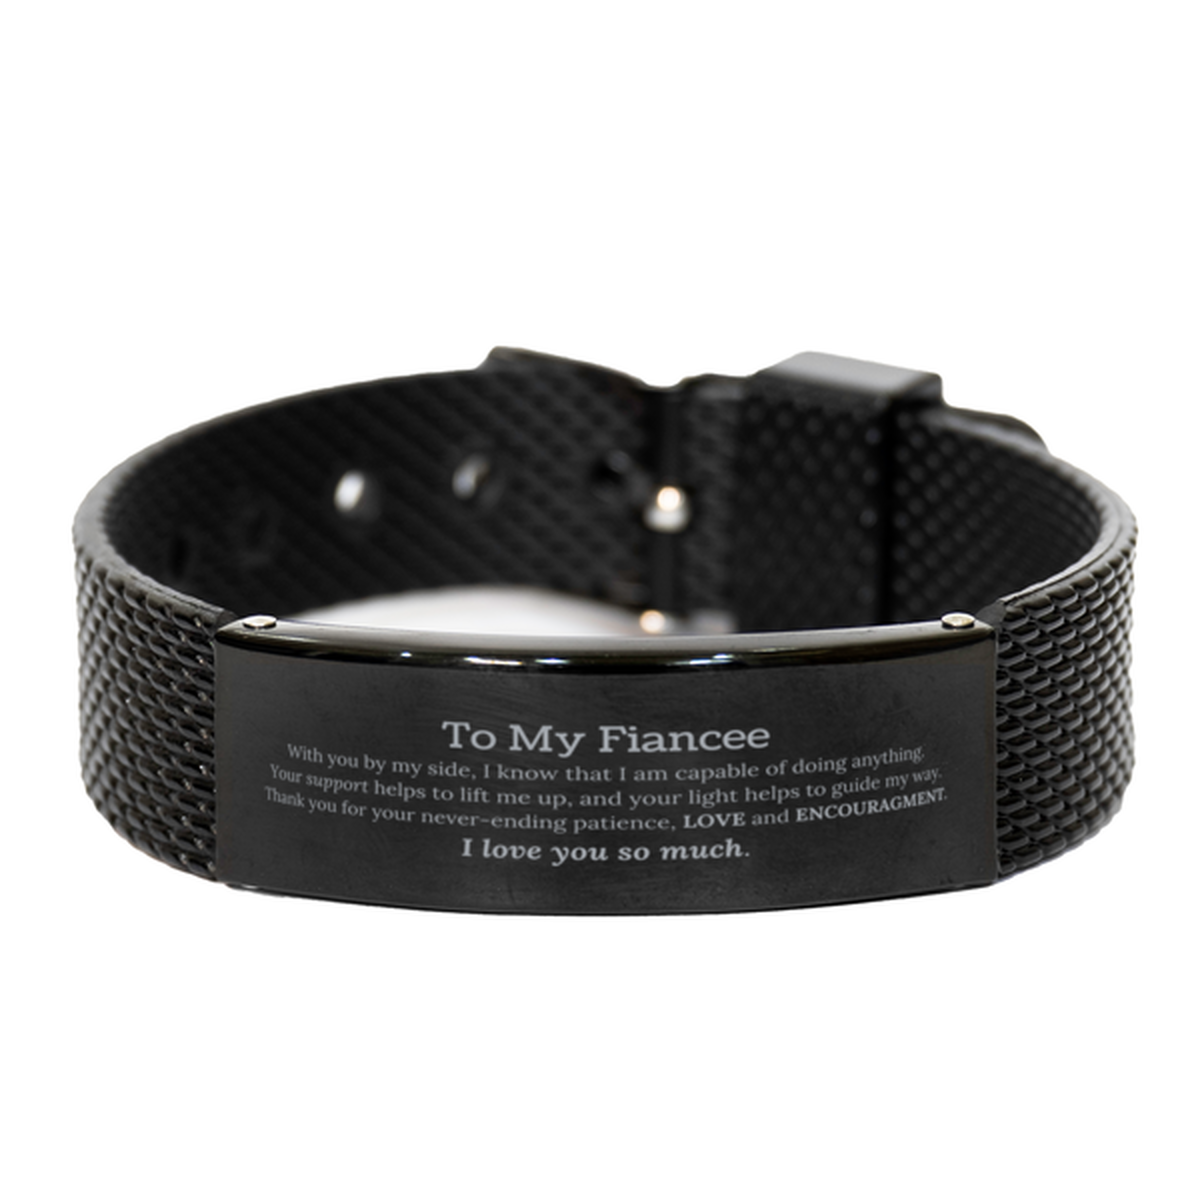 Appreciation Fiancee Black Shark Mesh Bracelet Gifts, To My Fiancee Birthday Christmas Wedding Keepsake Gifts for Fiancee With you by my side, I know that I am capable of doing anything. I love you so much